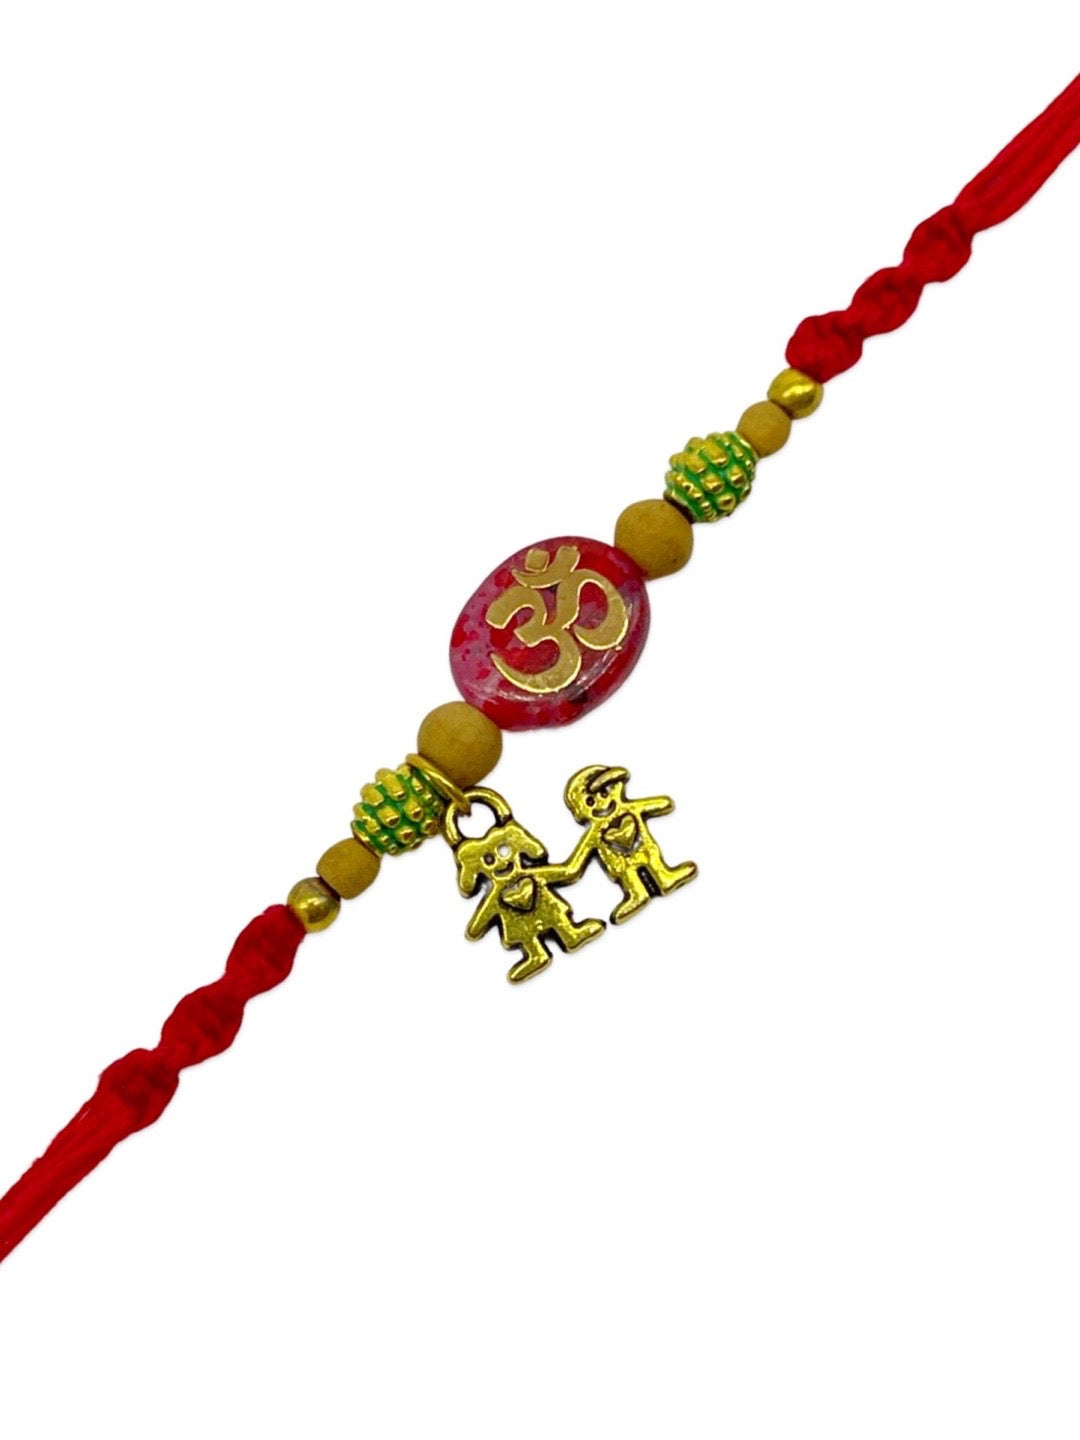 Check Out the List of Best Rakhi Gifts for Sister Handpicked for You